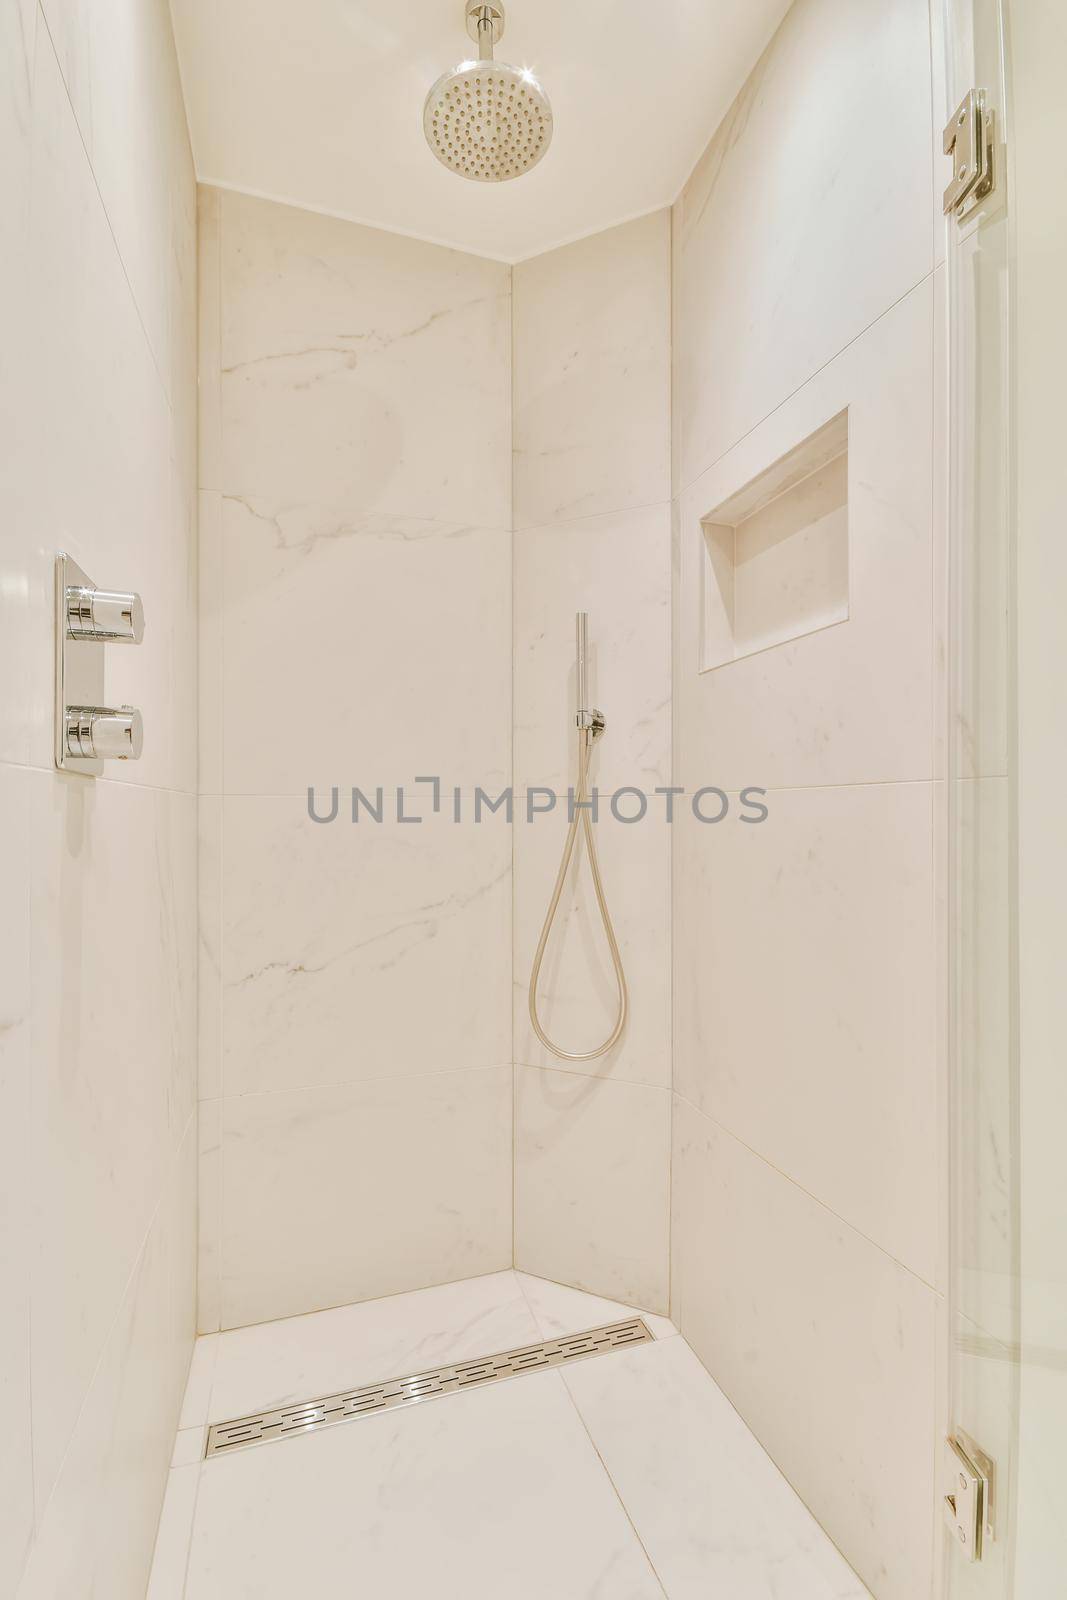 Bathroom with built-in shower head in the shower by casamedia